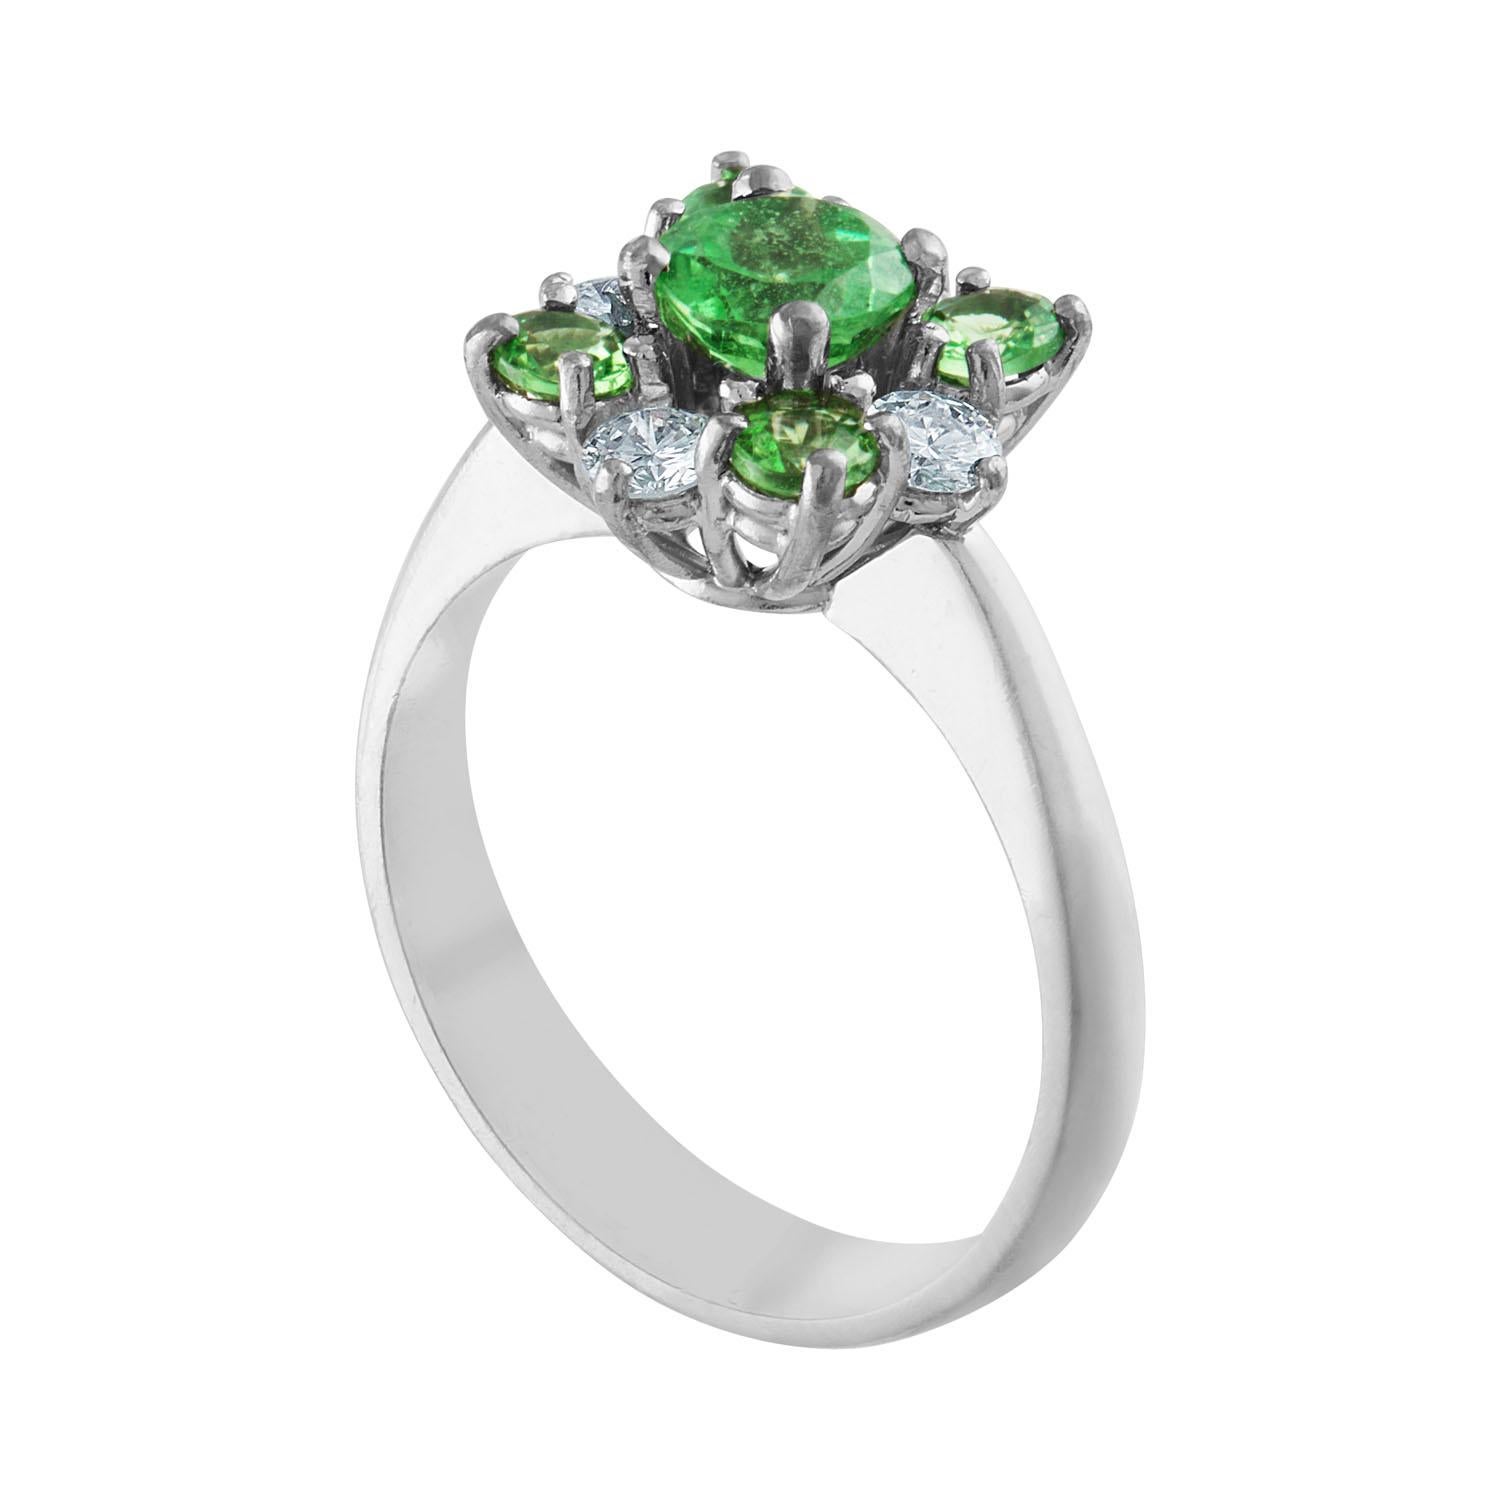 The Cluster Ring is 18K White Gold.
There are 1.27 Carats in Tsavorite.
There are 0.40 Carats in Diamonds F VS.
The ring is a size 7.0, sizable.
The ring weighs 5.1 grams.